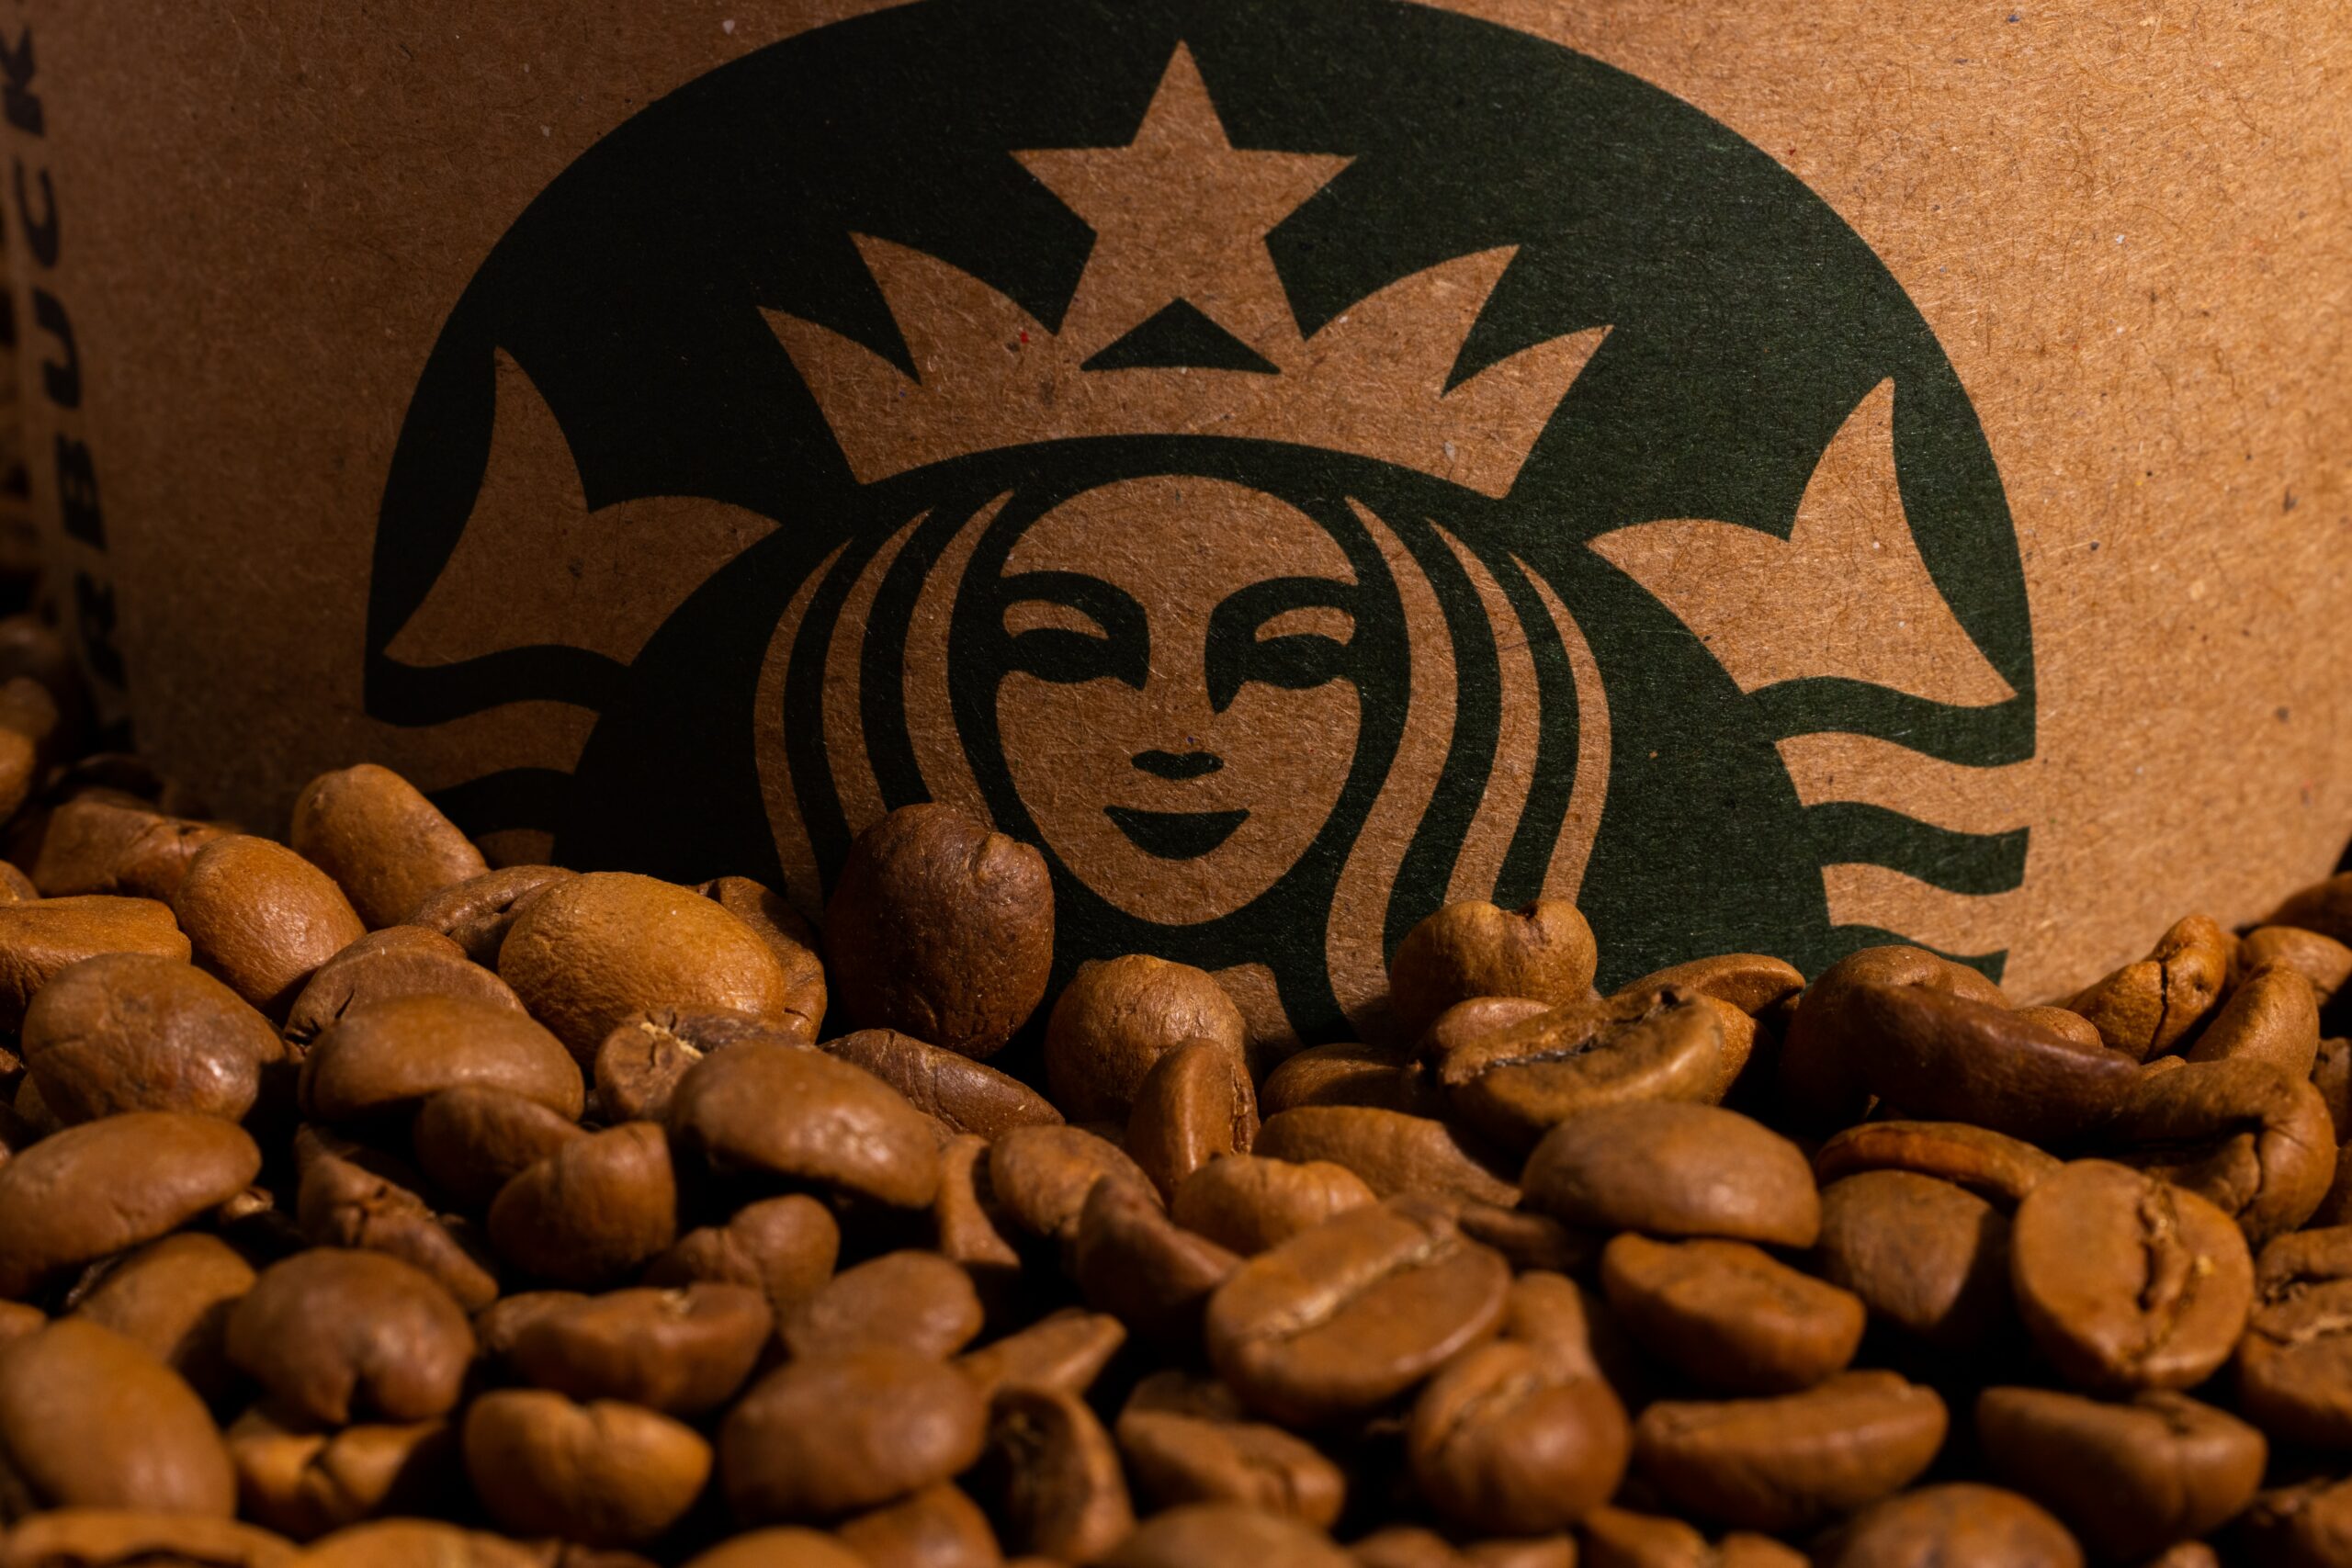 a close up of the starbucks green siren logo on a cardboard background in front of a pile of coffee beans